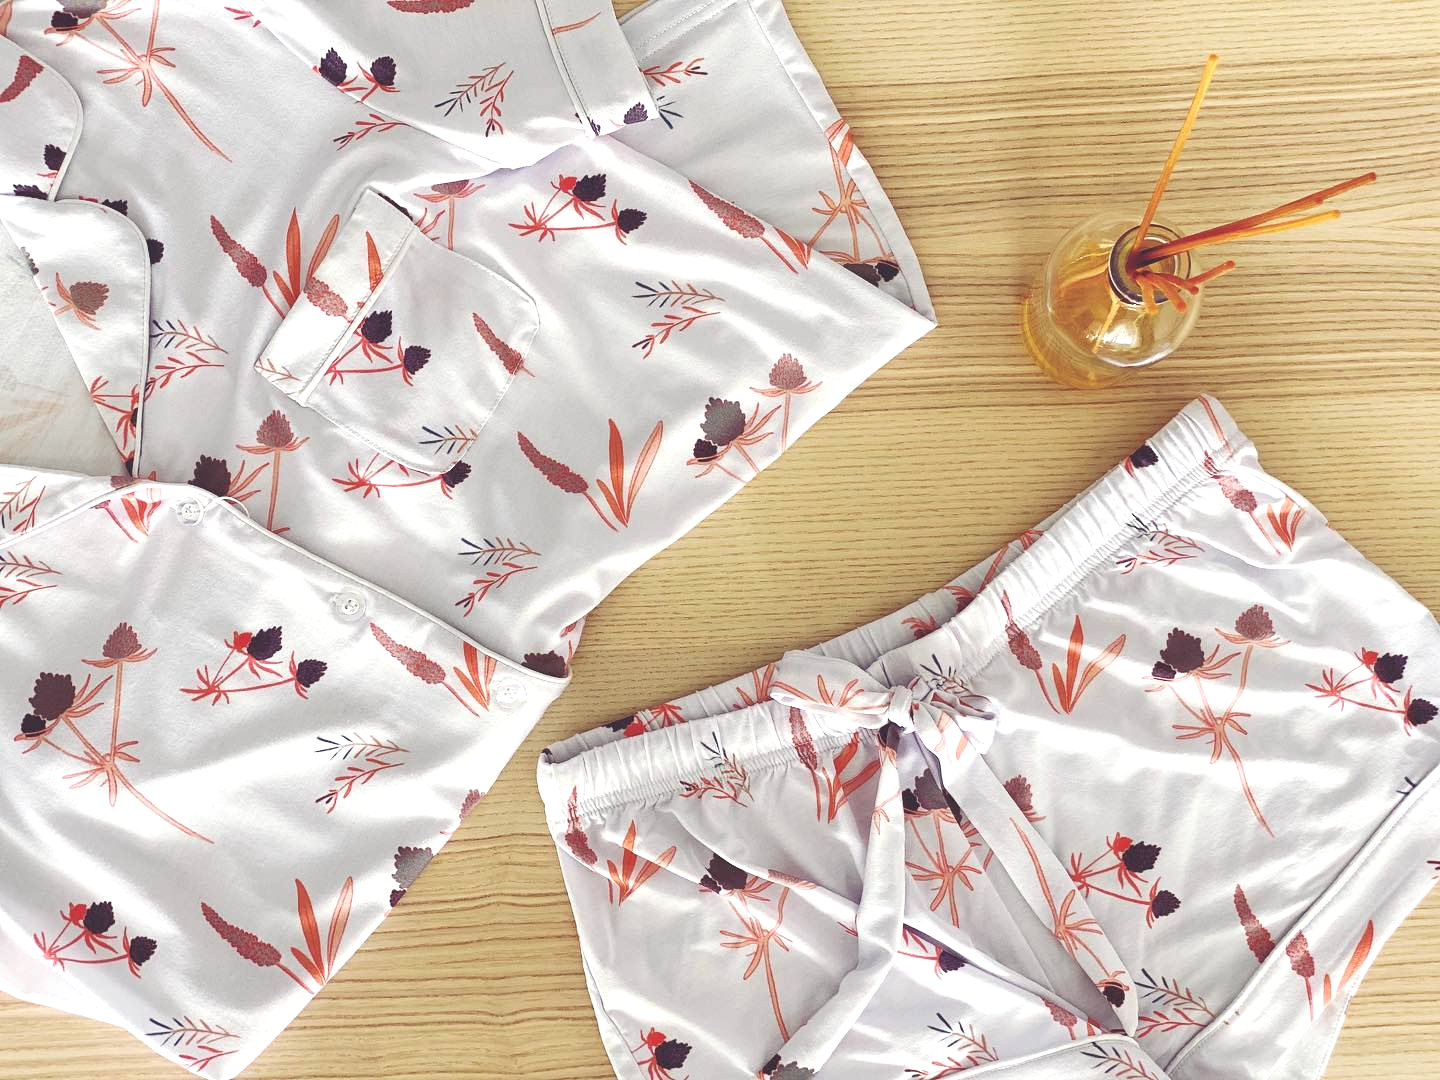 Sleebbee’s high quality bamboo fabric is light and breezy – perfect for our hot tropical weather.